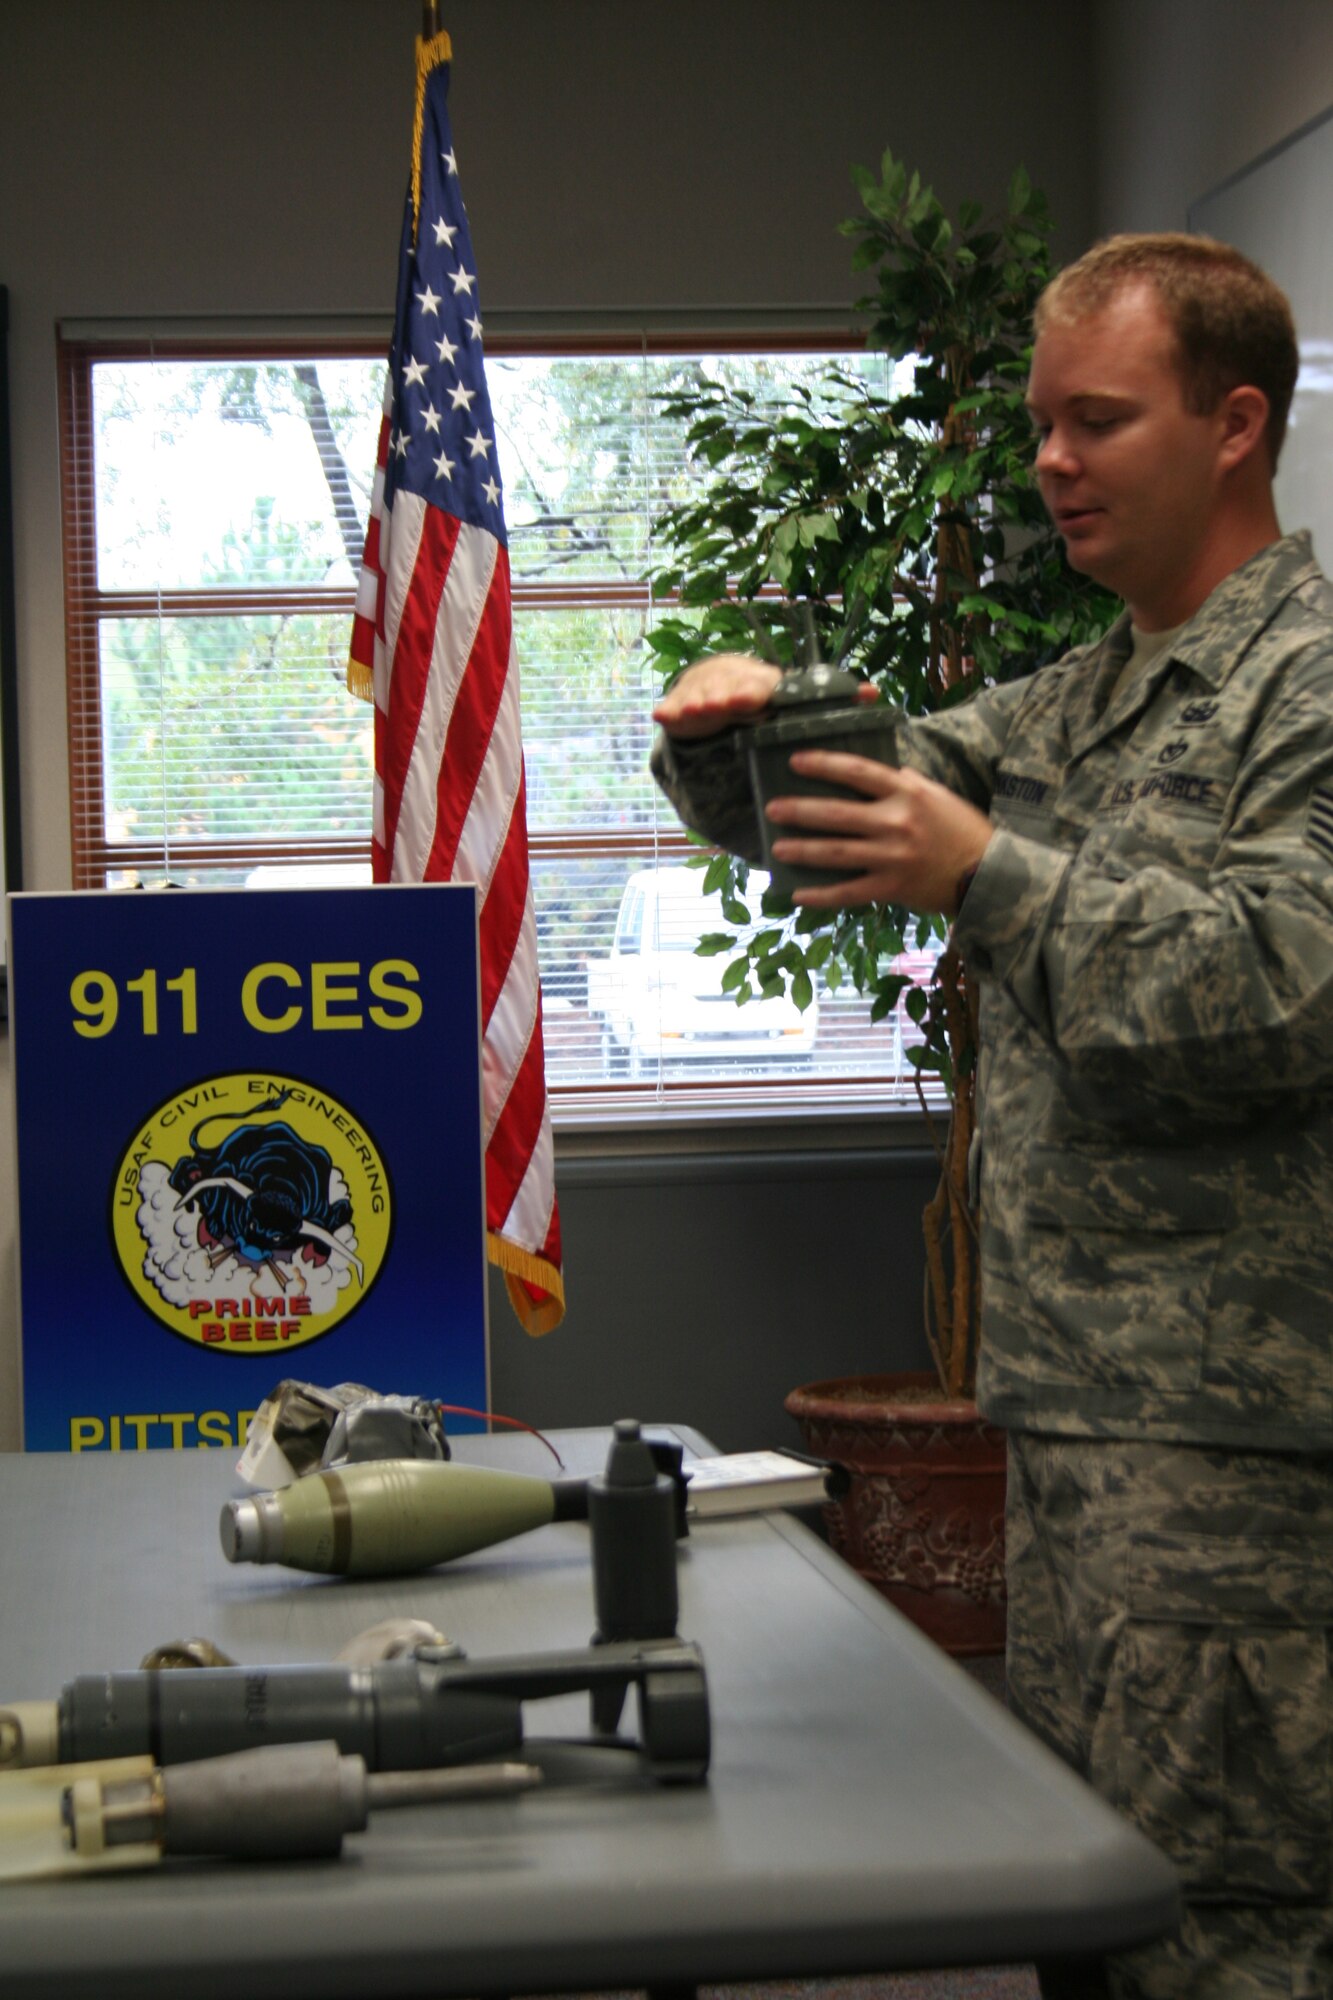 Staff Sgt. Robert Pirkston, an explosive ordinance craftsman with the 94th Civil Engineering Squadron, Dobbins Air Force Base, demonstrates to class members an example of a land mine. Airmen from 22nd Air Force, Dobbins Air Force Base were on hand here during the September Unit Training Assembly to provide explosive Ordinance reconnaissance training to Airmen here in preparation for the upcoming
operational readiness inspection. 

(U.S. Air Force Reserve photo / Staff Sgt. Roberto Modelo)